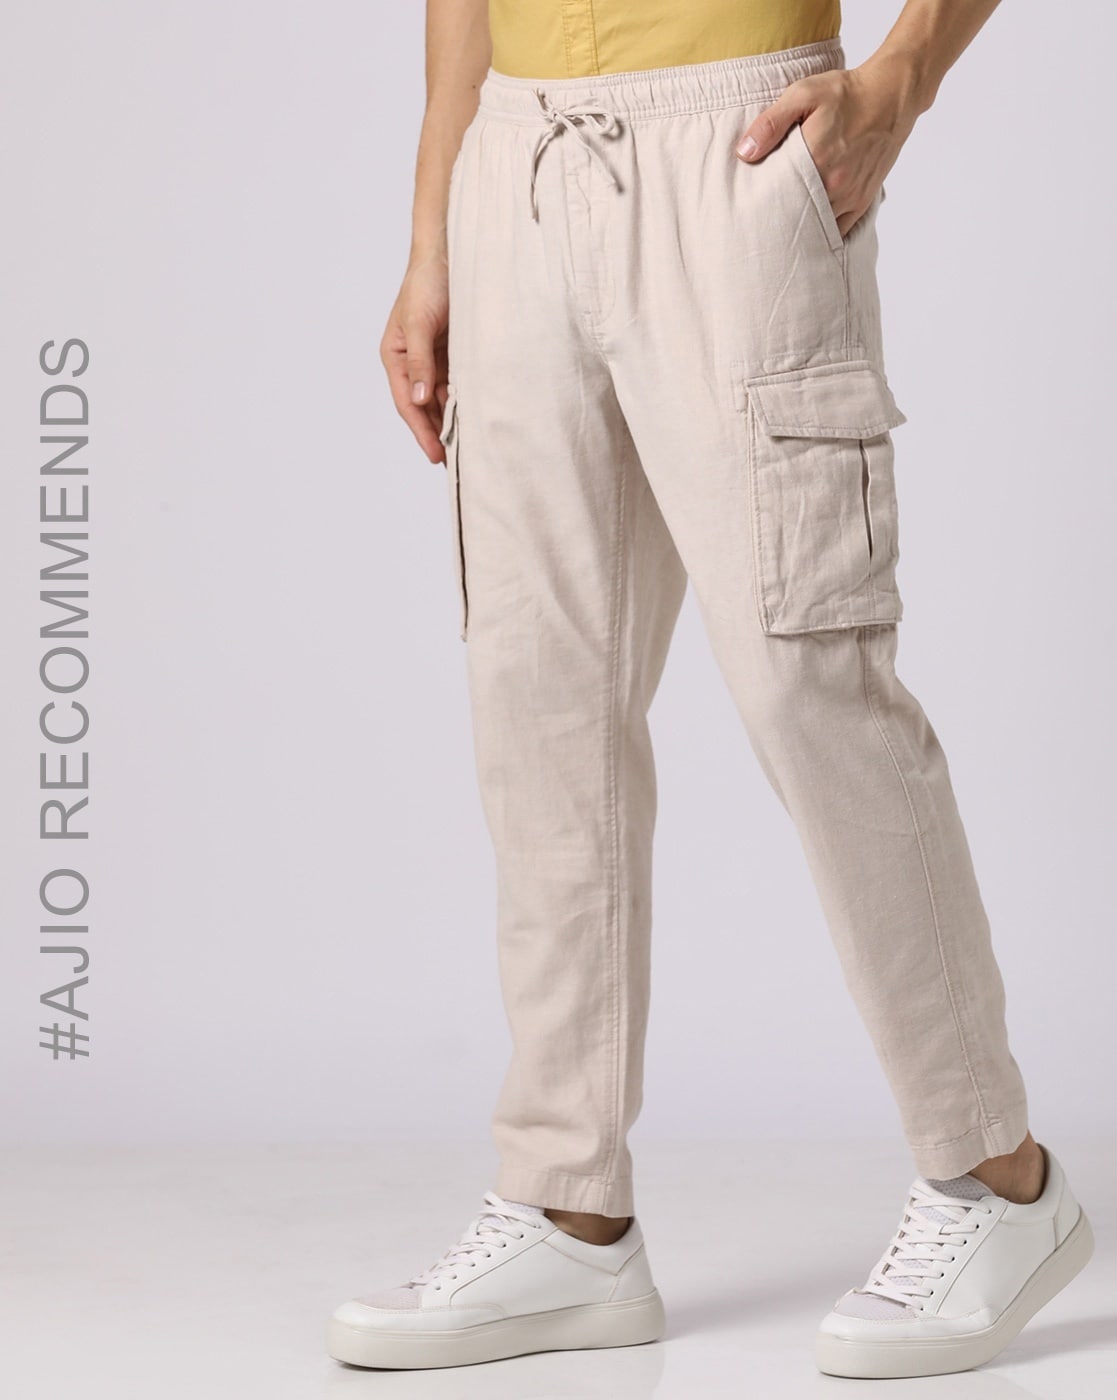 Buy Black Trousers  Pants for Men by ALTHEORY Online  Ajiocom